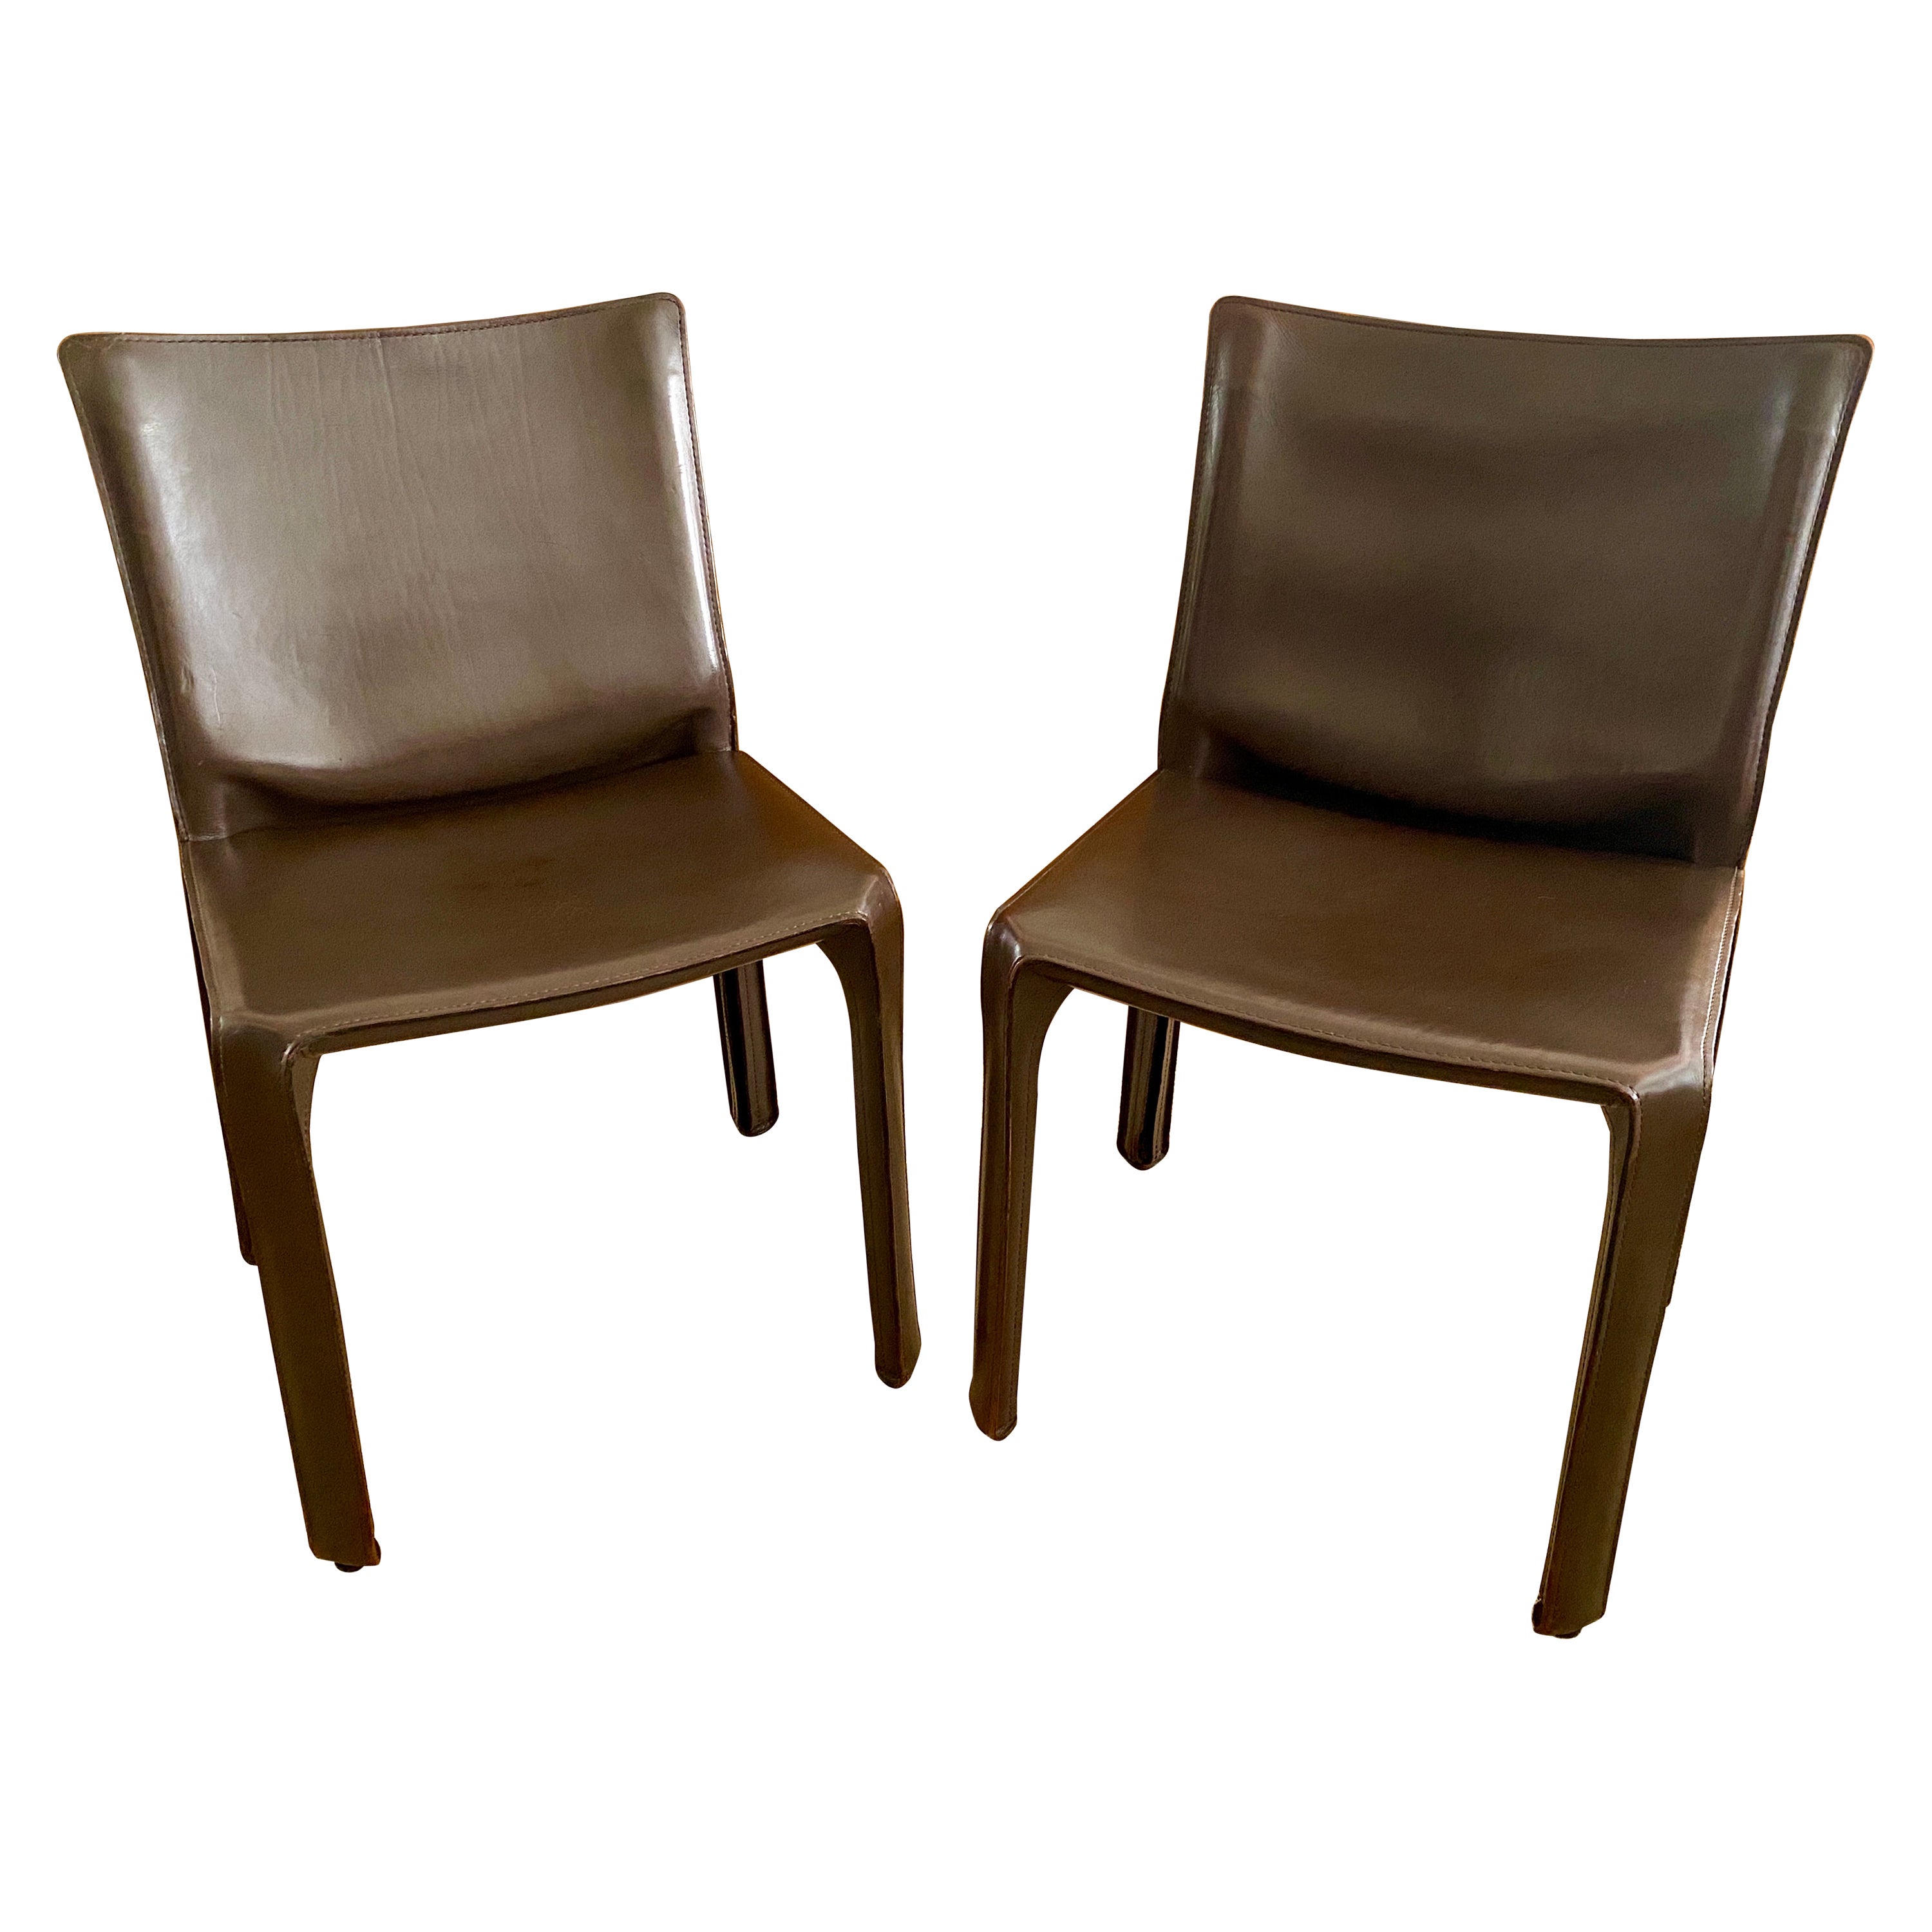 Two Dark Brown CAB 412 Chairs Designed by Mario Bellini for Cassina For Sale